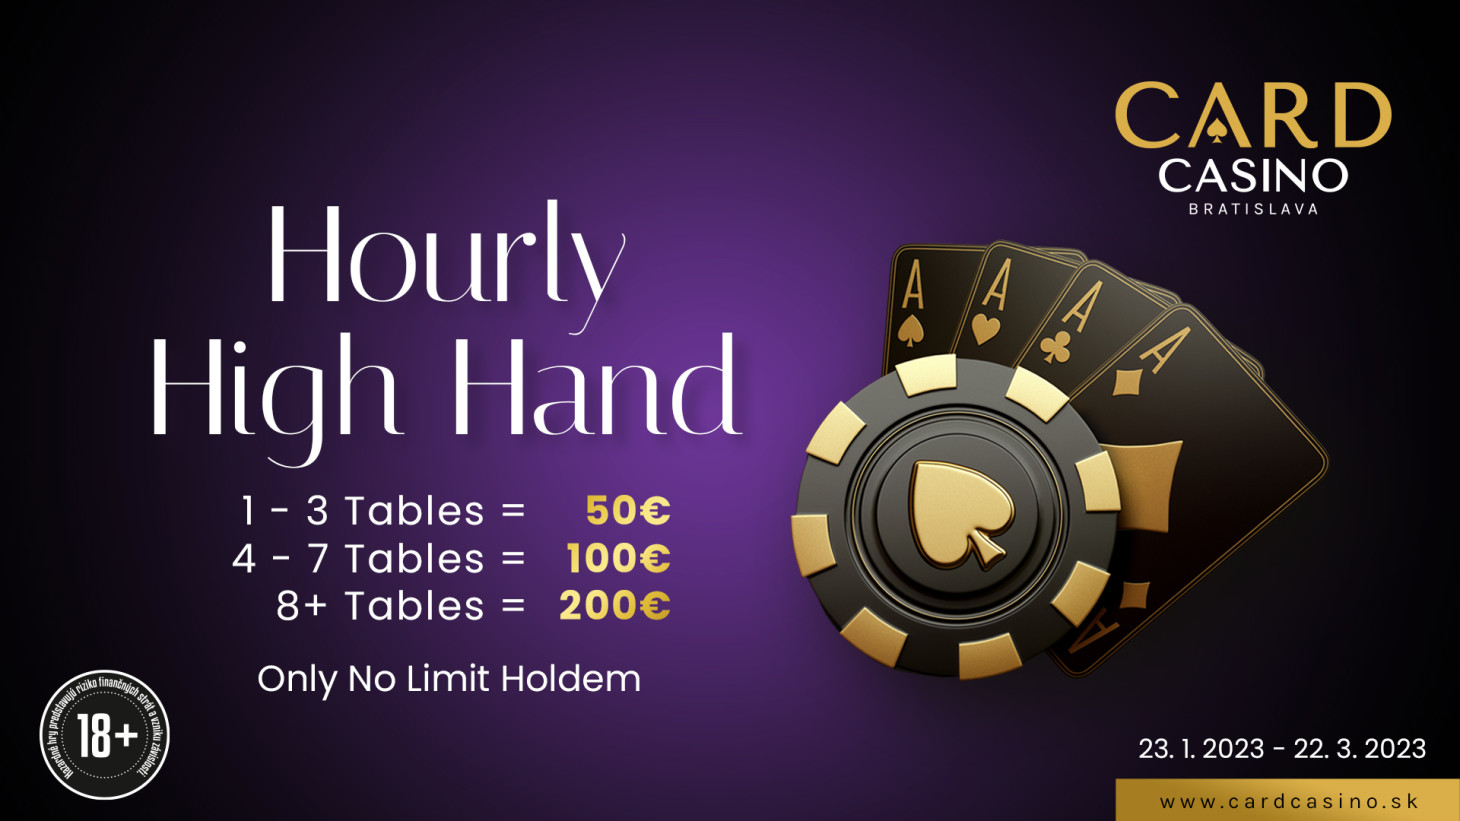 Come for an hourly reward of €50 or more as part of the High Hand bonus